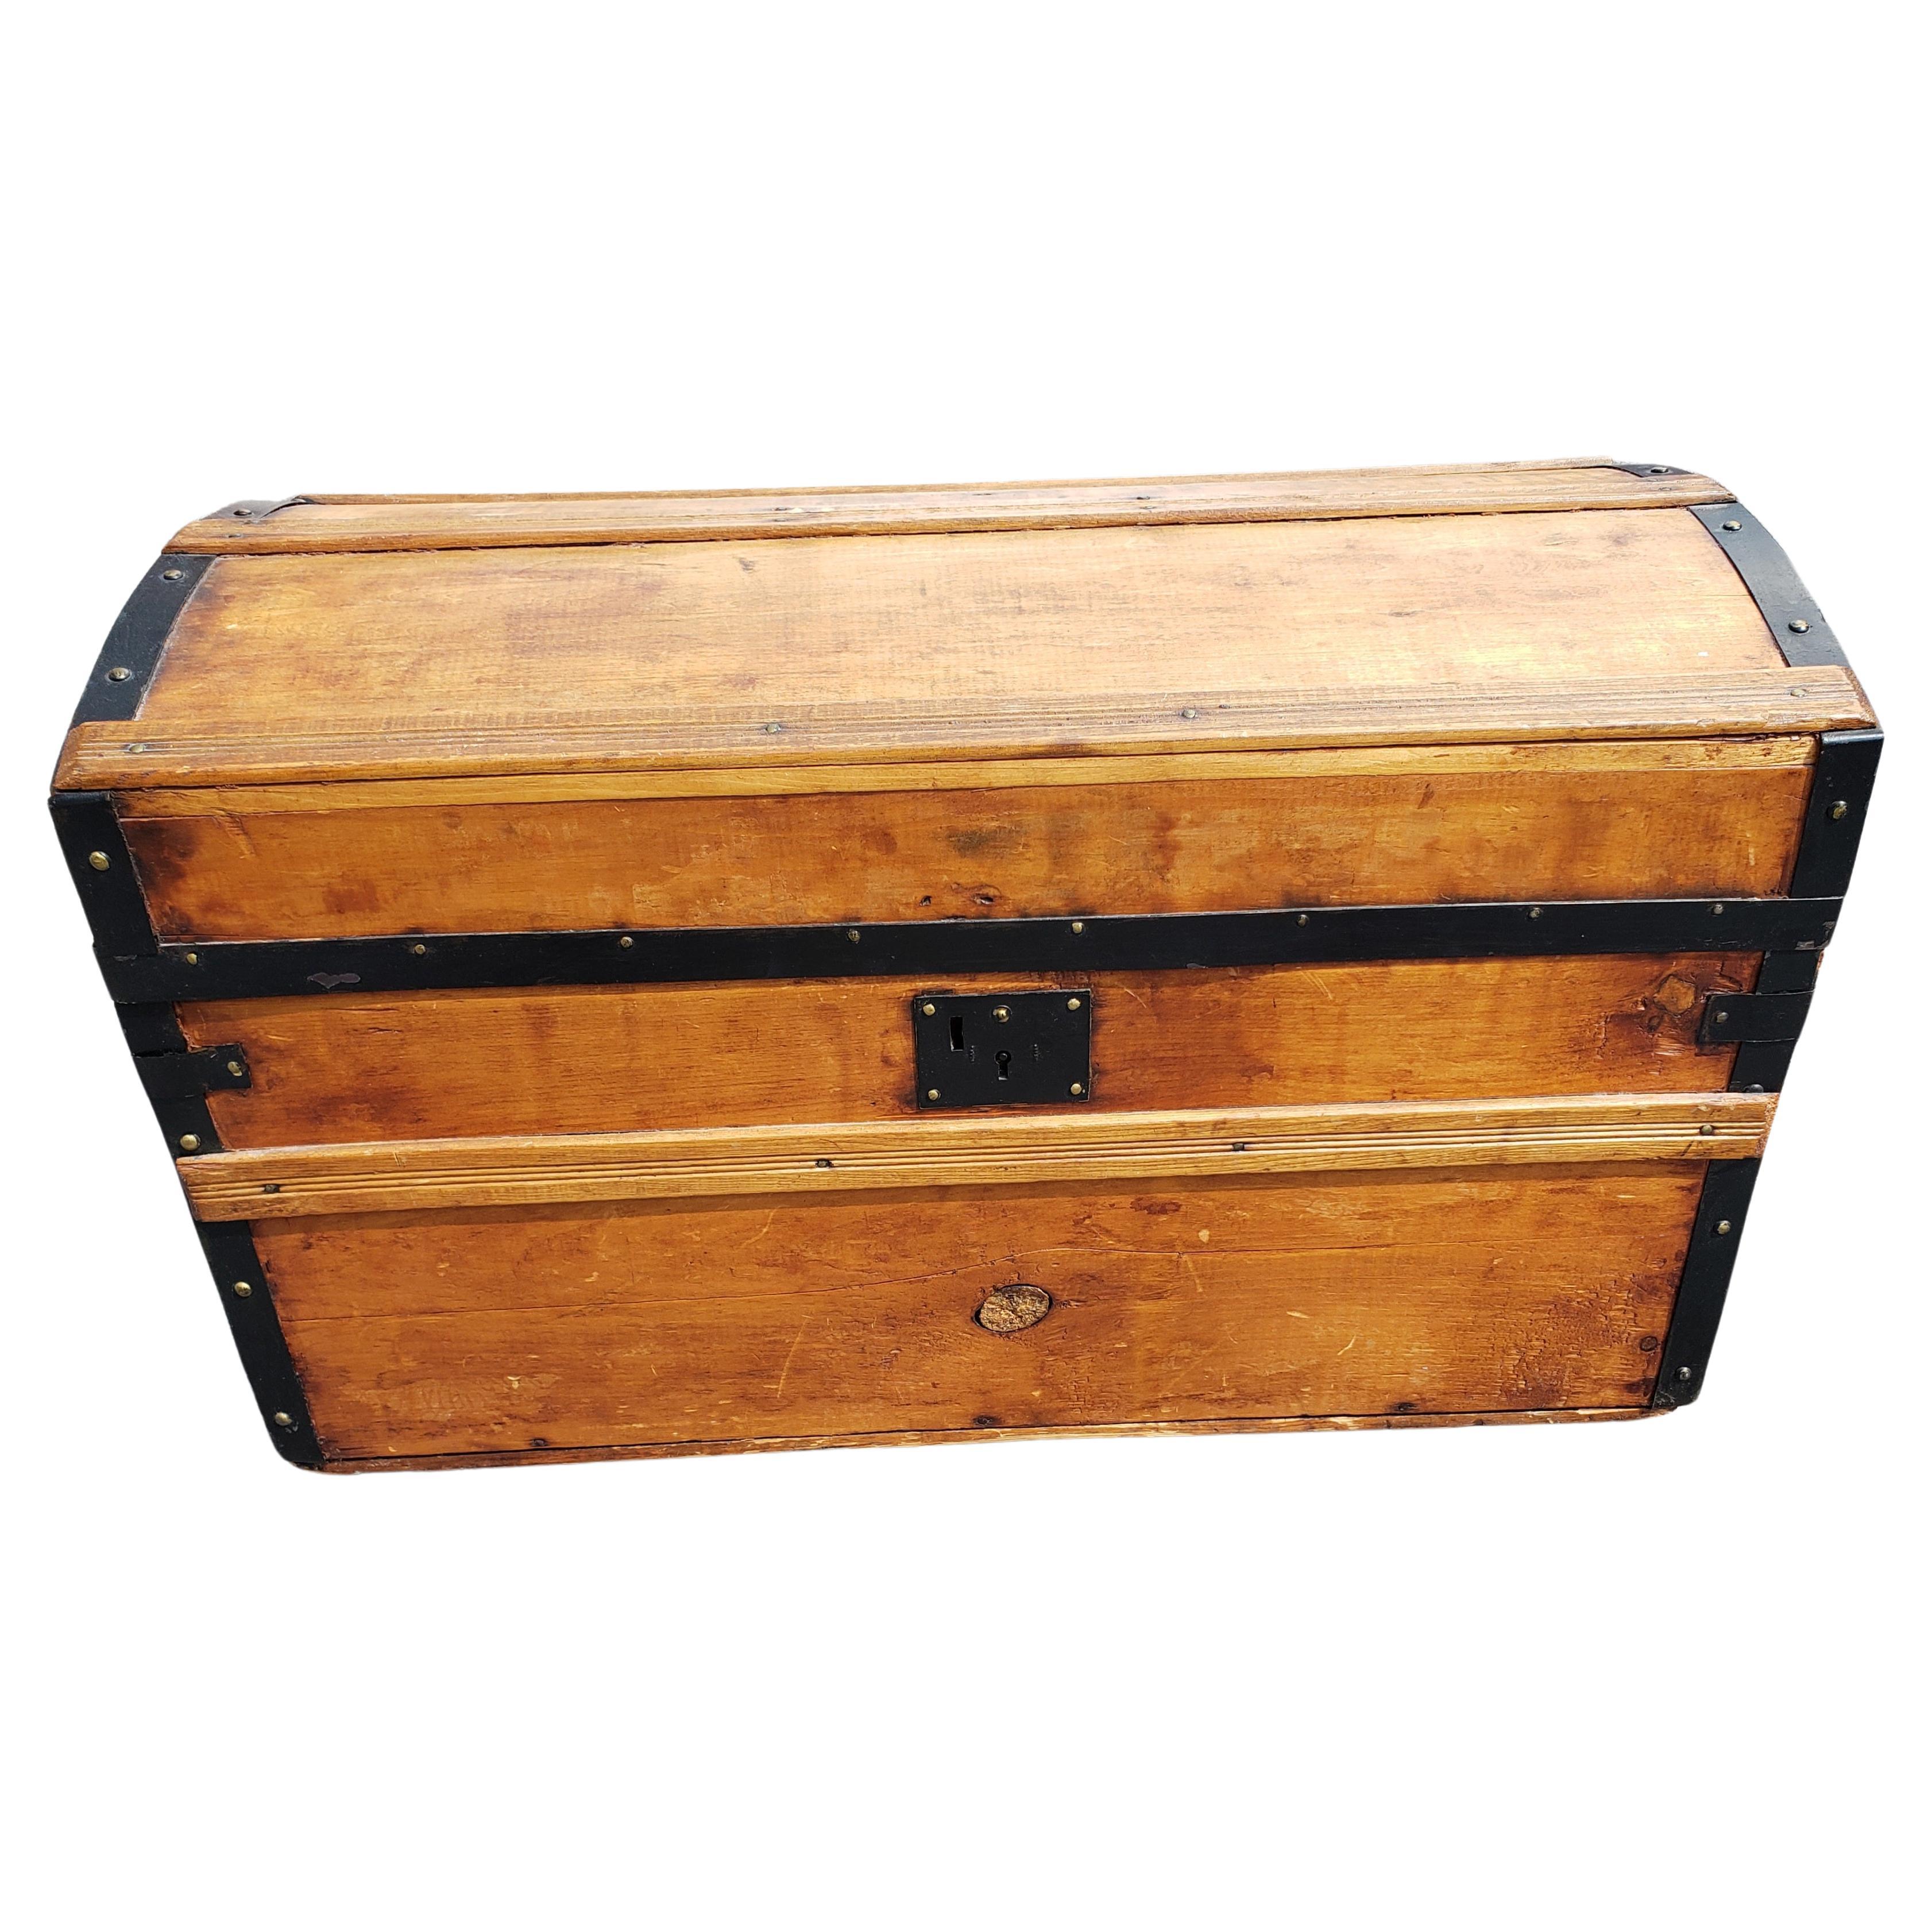 Early American Refinished Pine and Metal Blanket Chest Storage Trunk For Sale